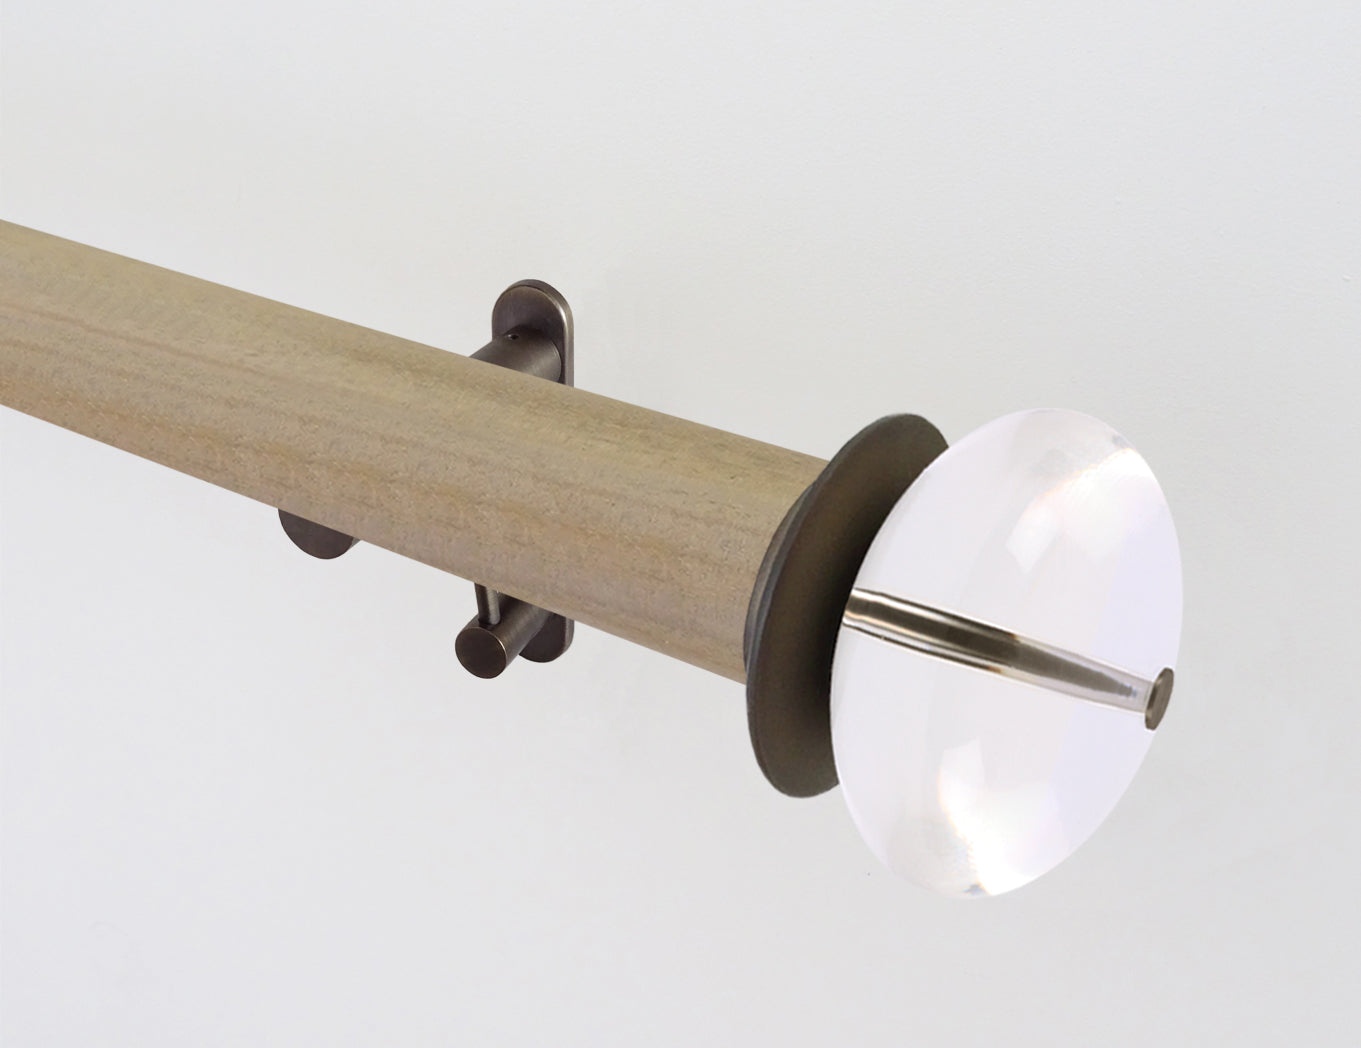 Light oak wooden tracked curtain pole with acrylic finials